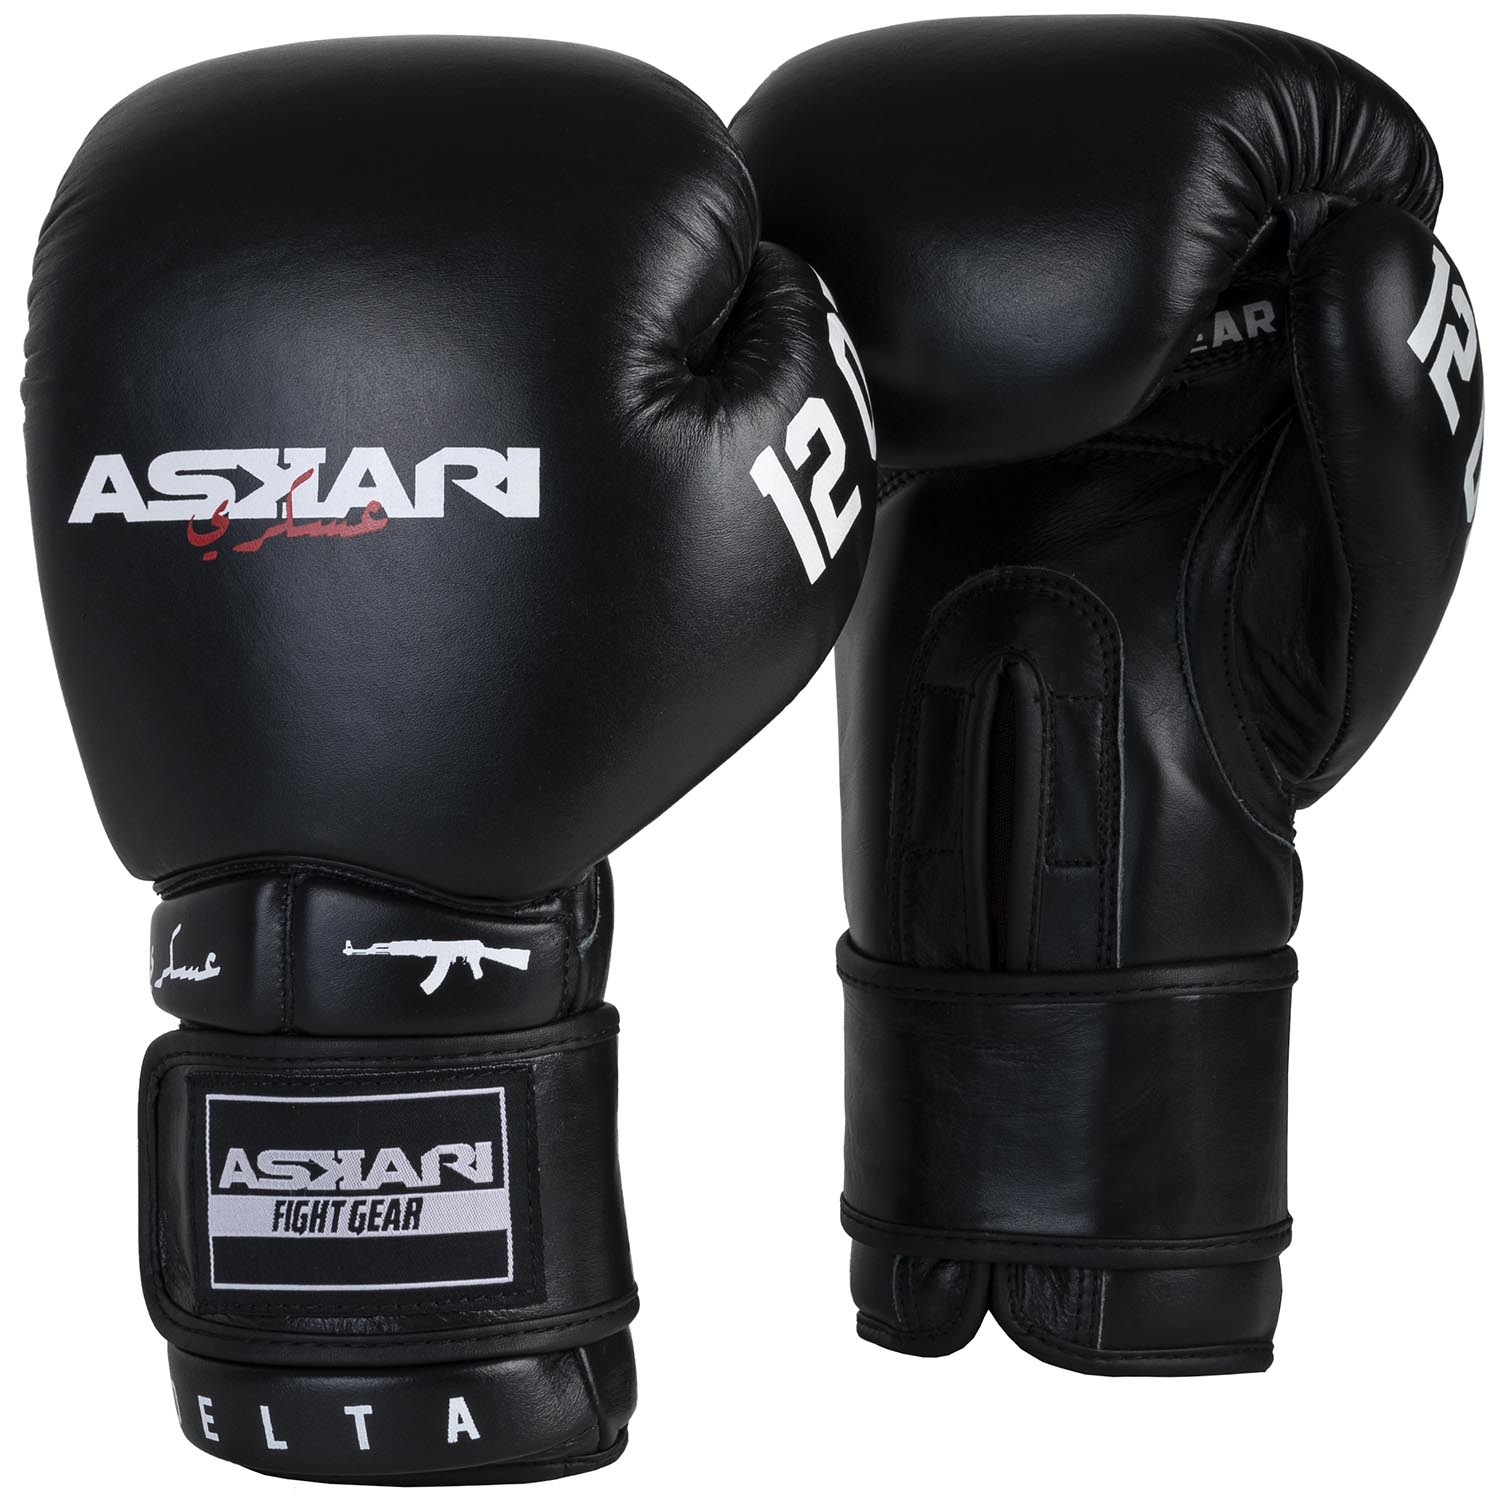 BLACK 'DUO GEAR 'STRIPES' BOXING SPARRING AND PADWORK MUAY THAI GLOVES 